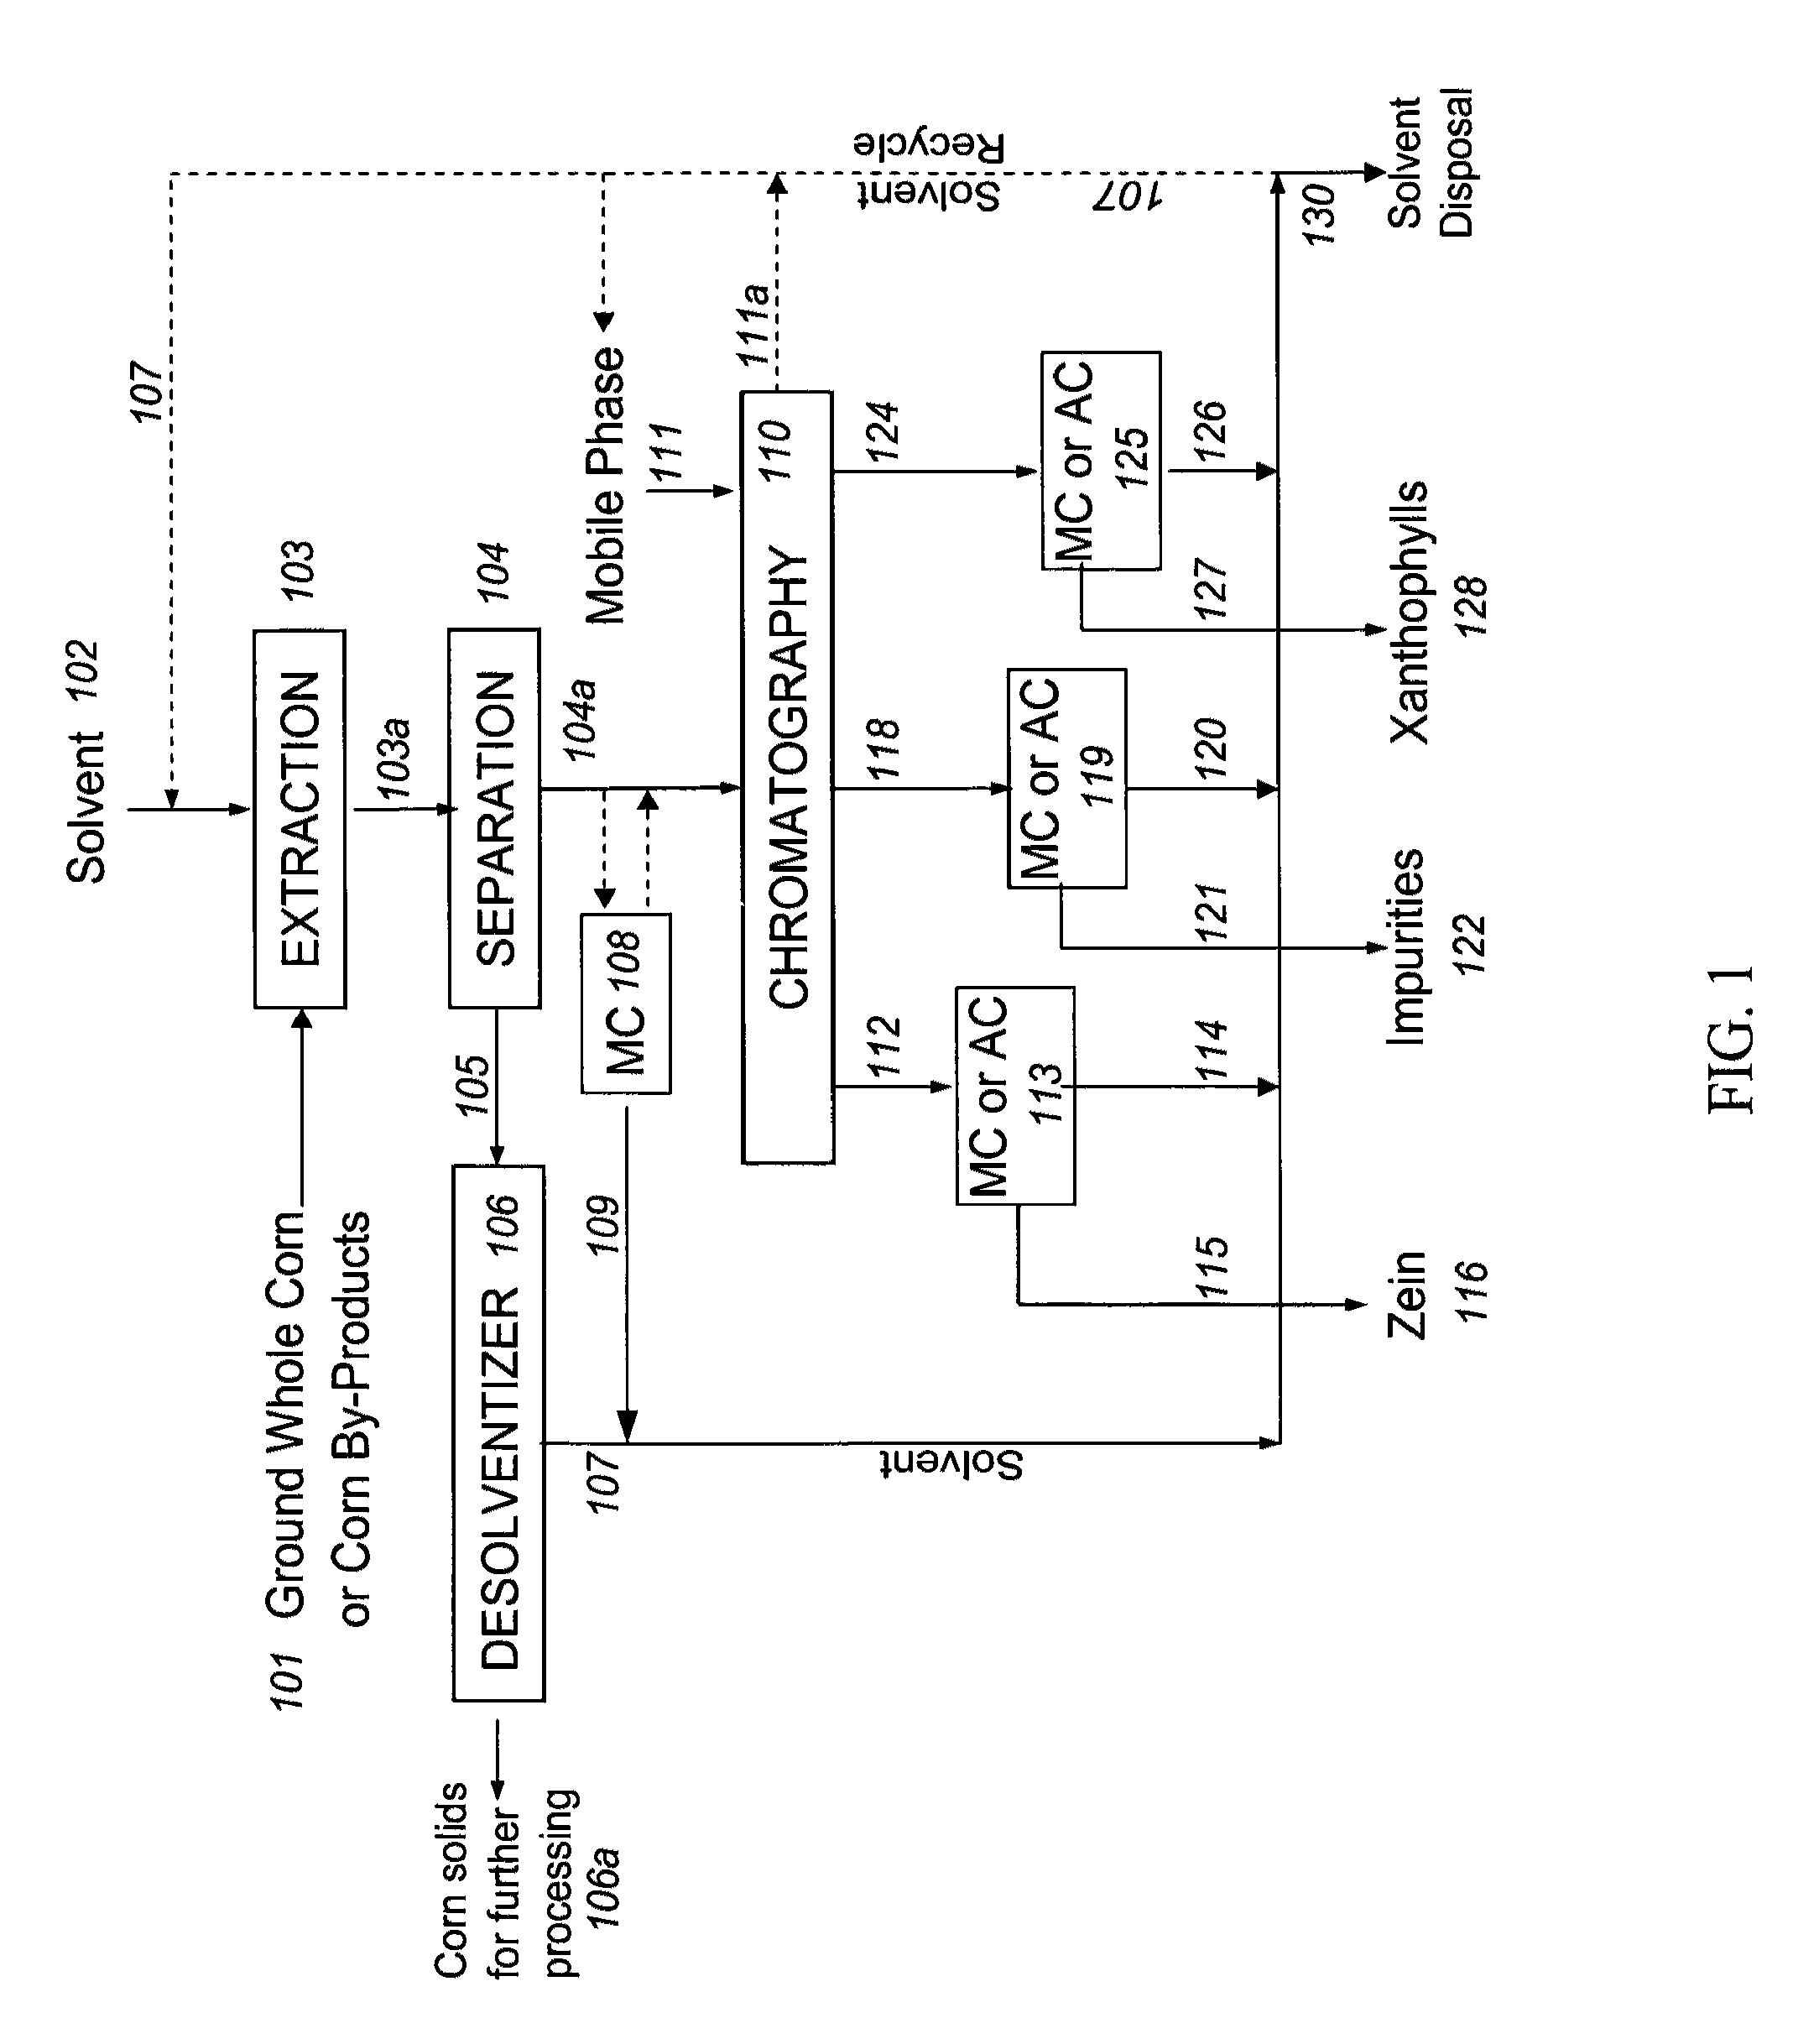 Method and system for production of zein and/or xanthophylls using chromatography